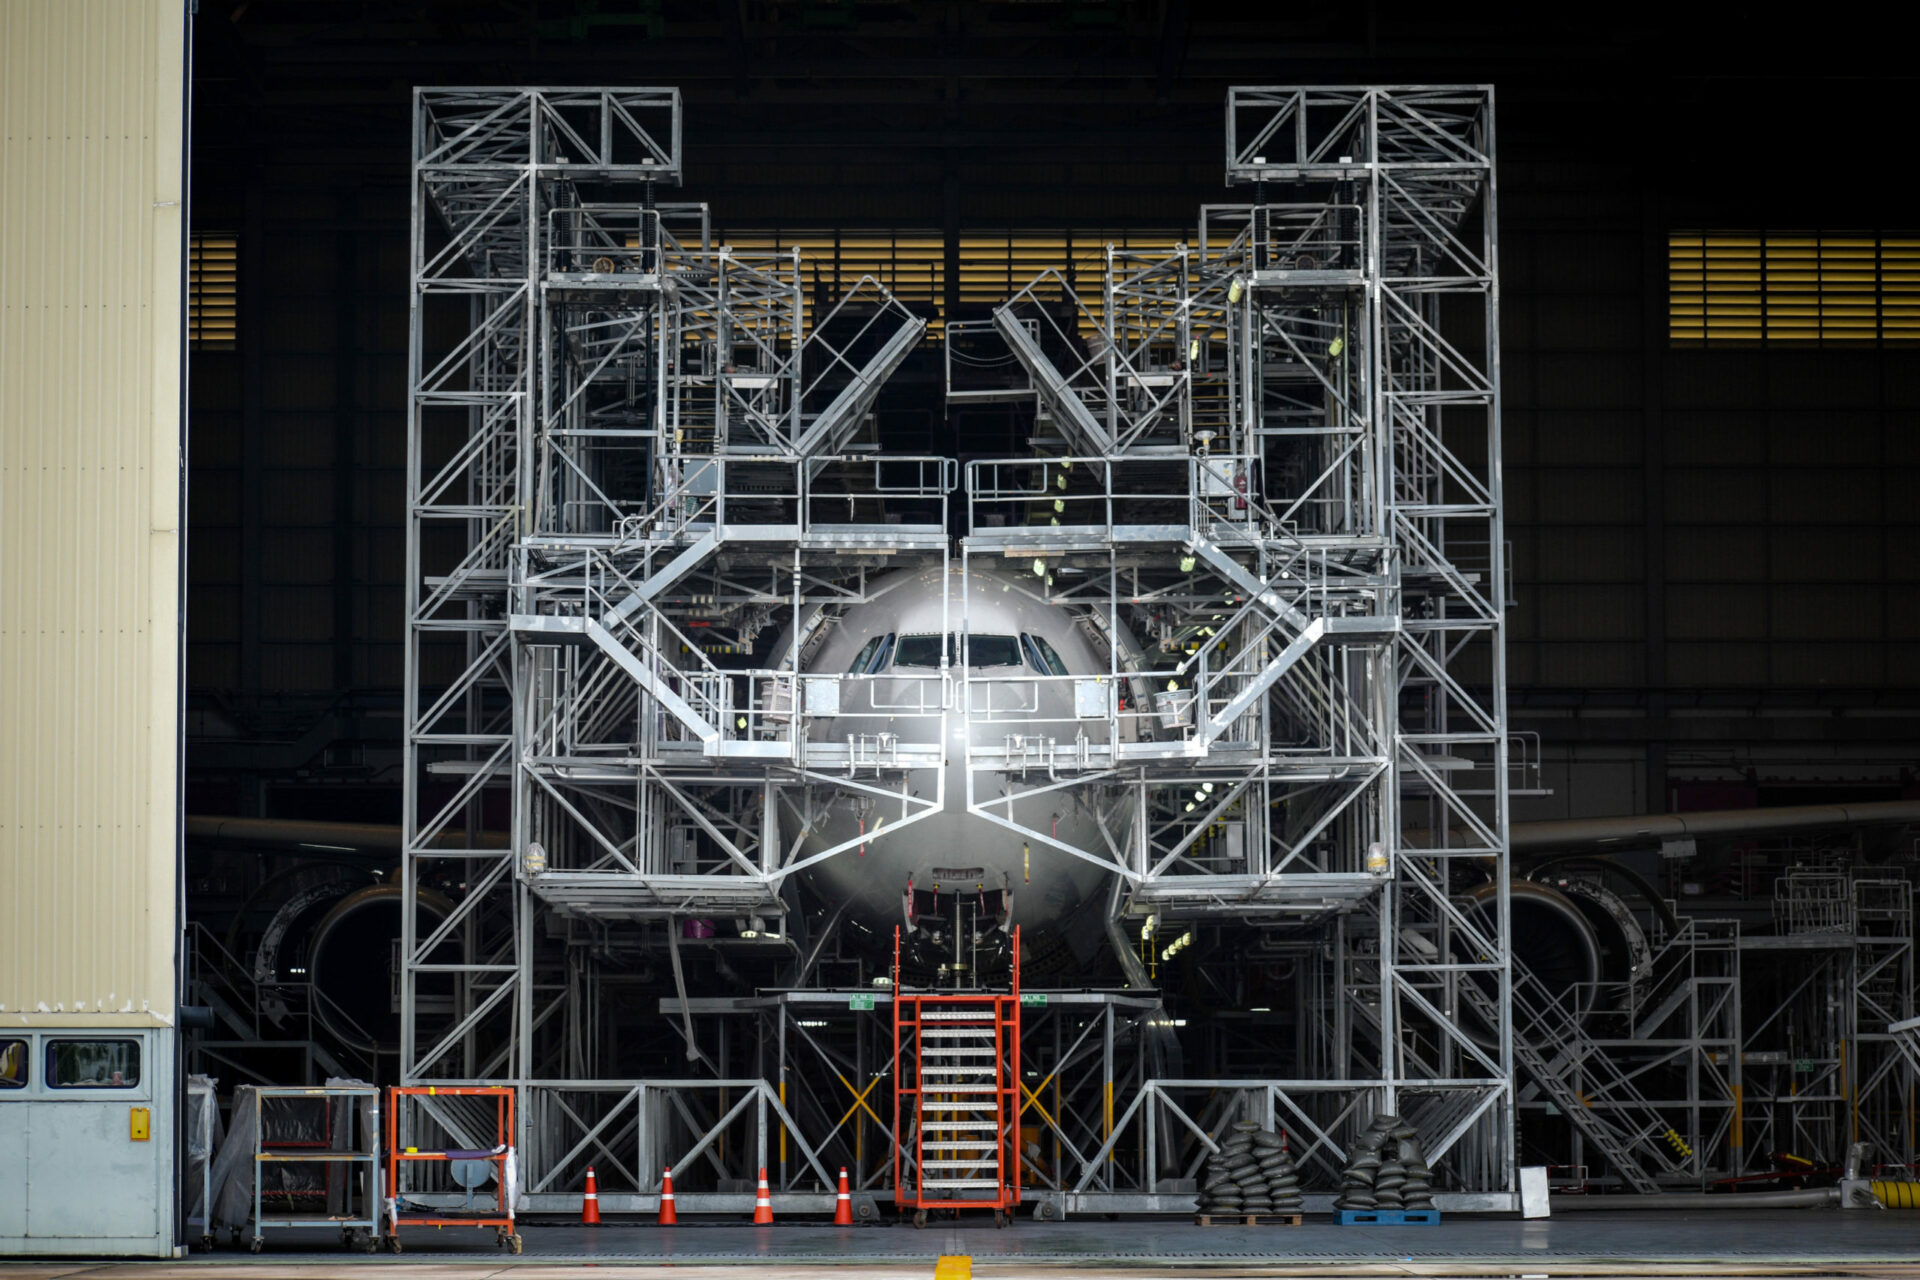 Jet airplane surrounded by scaffolding